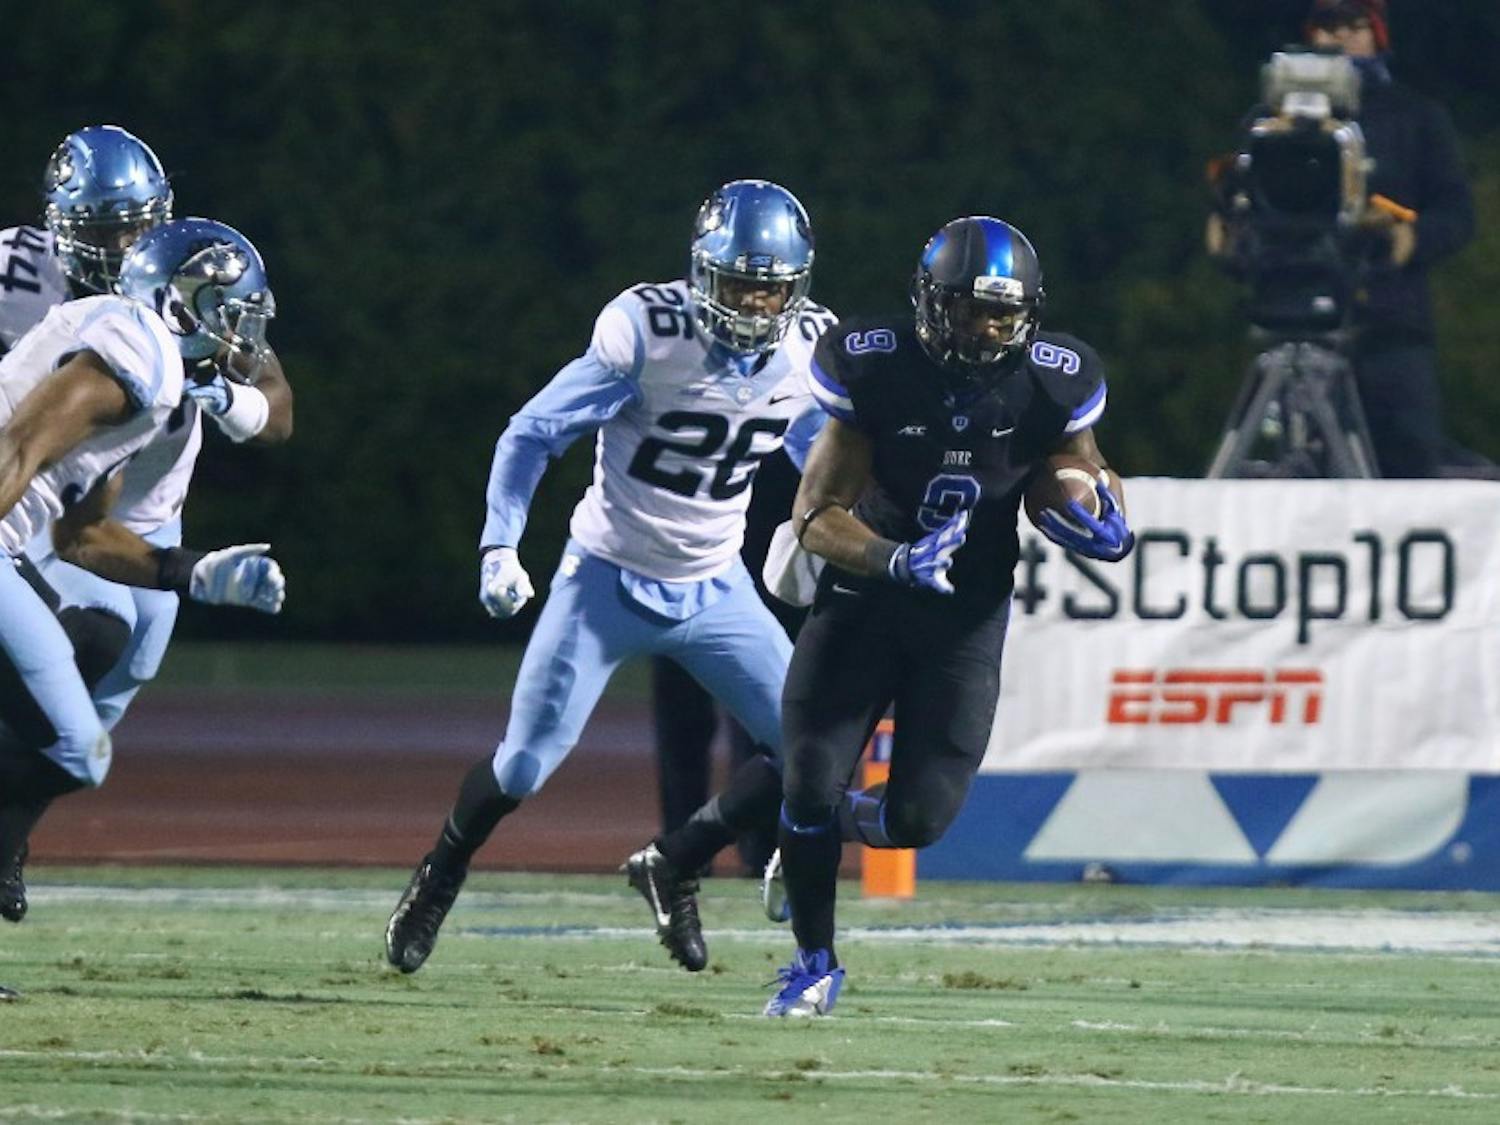 The Blue Devils average 183.3 rushing yards per game, good for 47th in the nation.